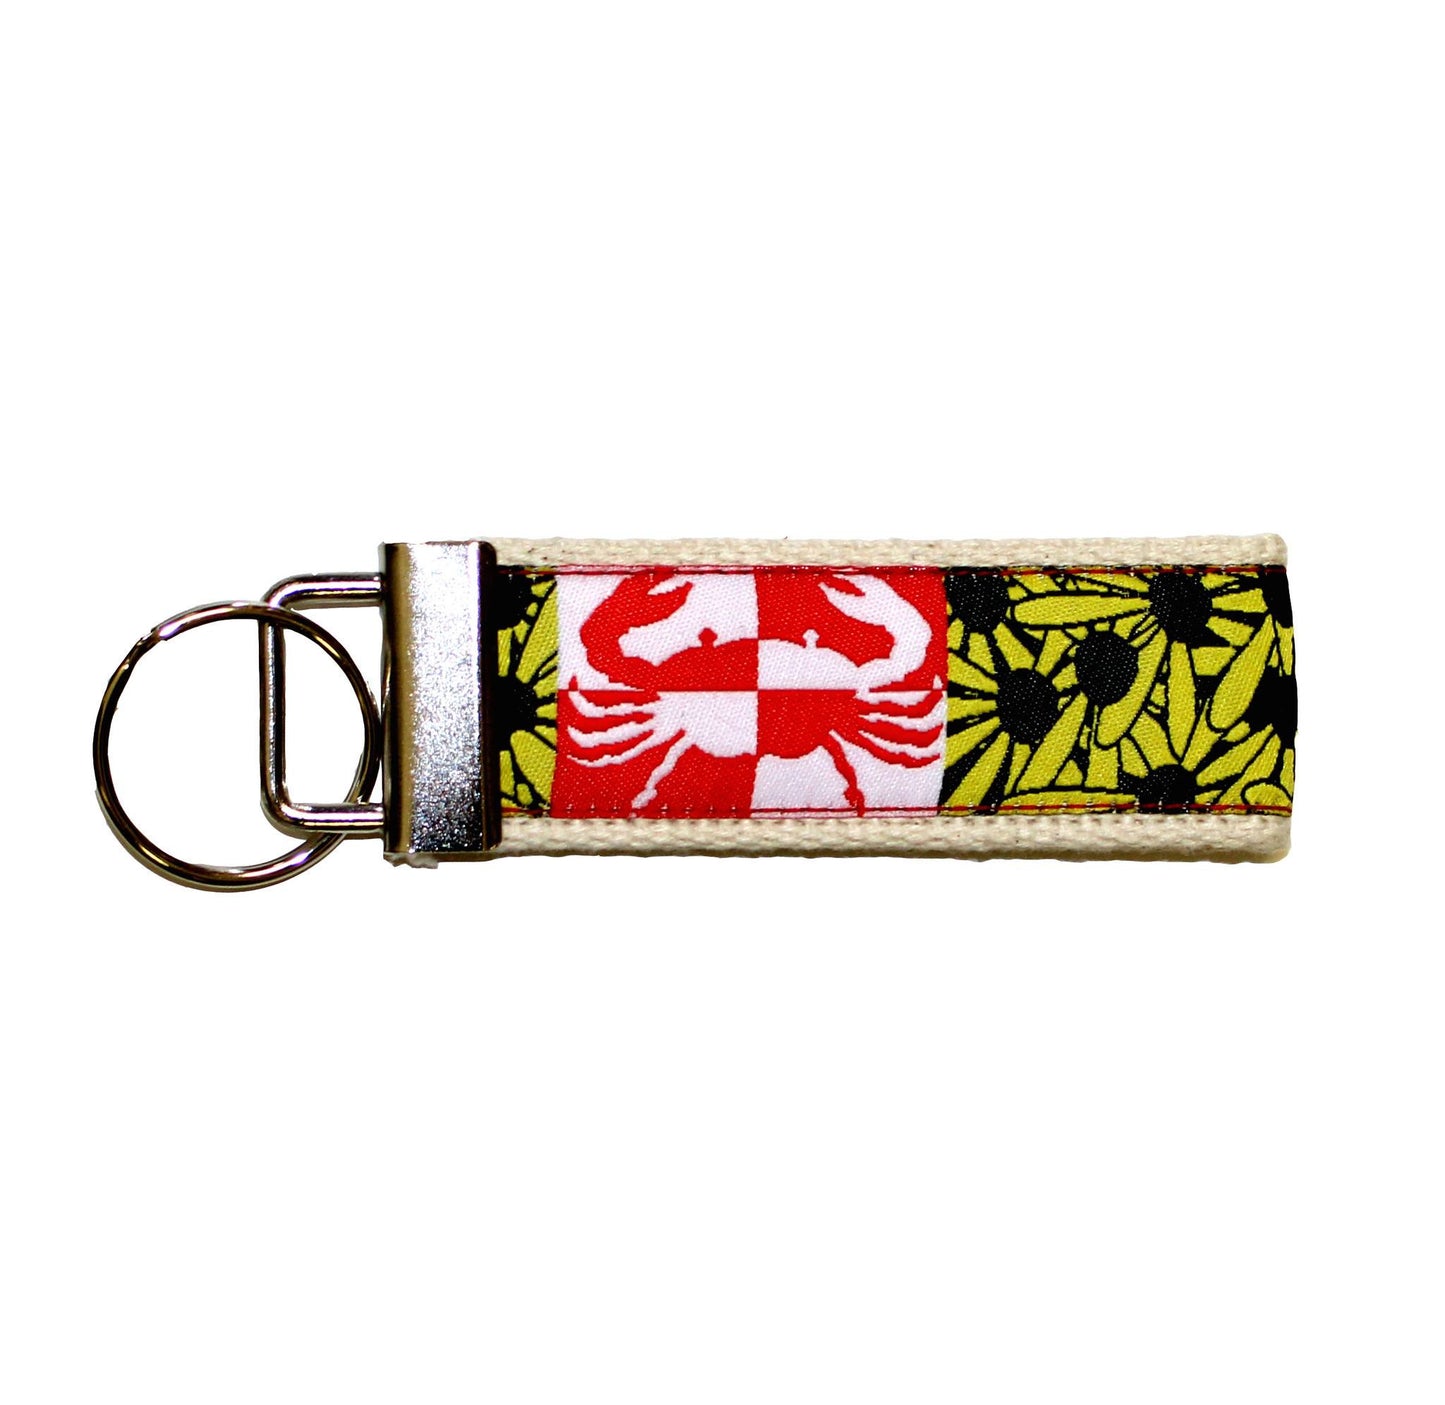 Crabby Susan Maryland / Key Chain - Route One Apparel